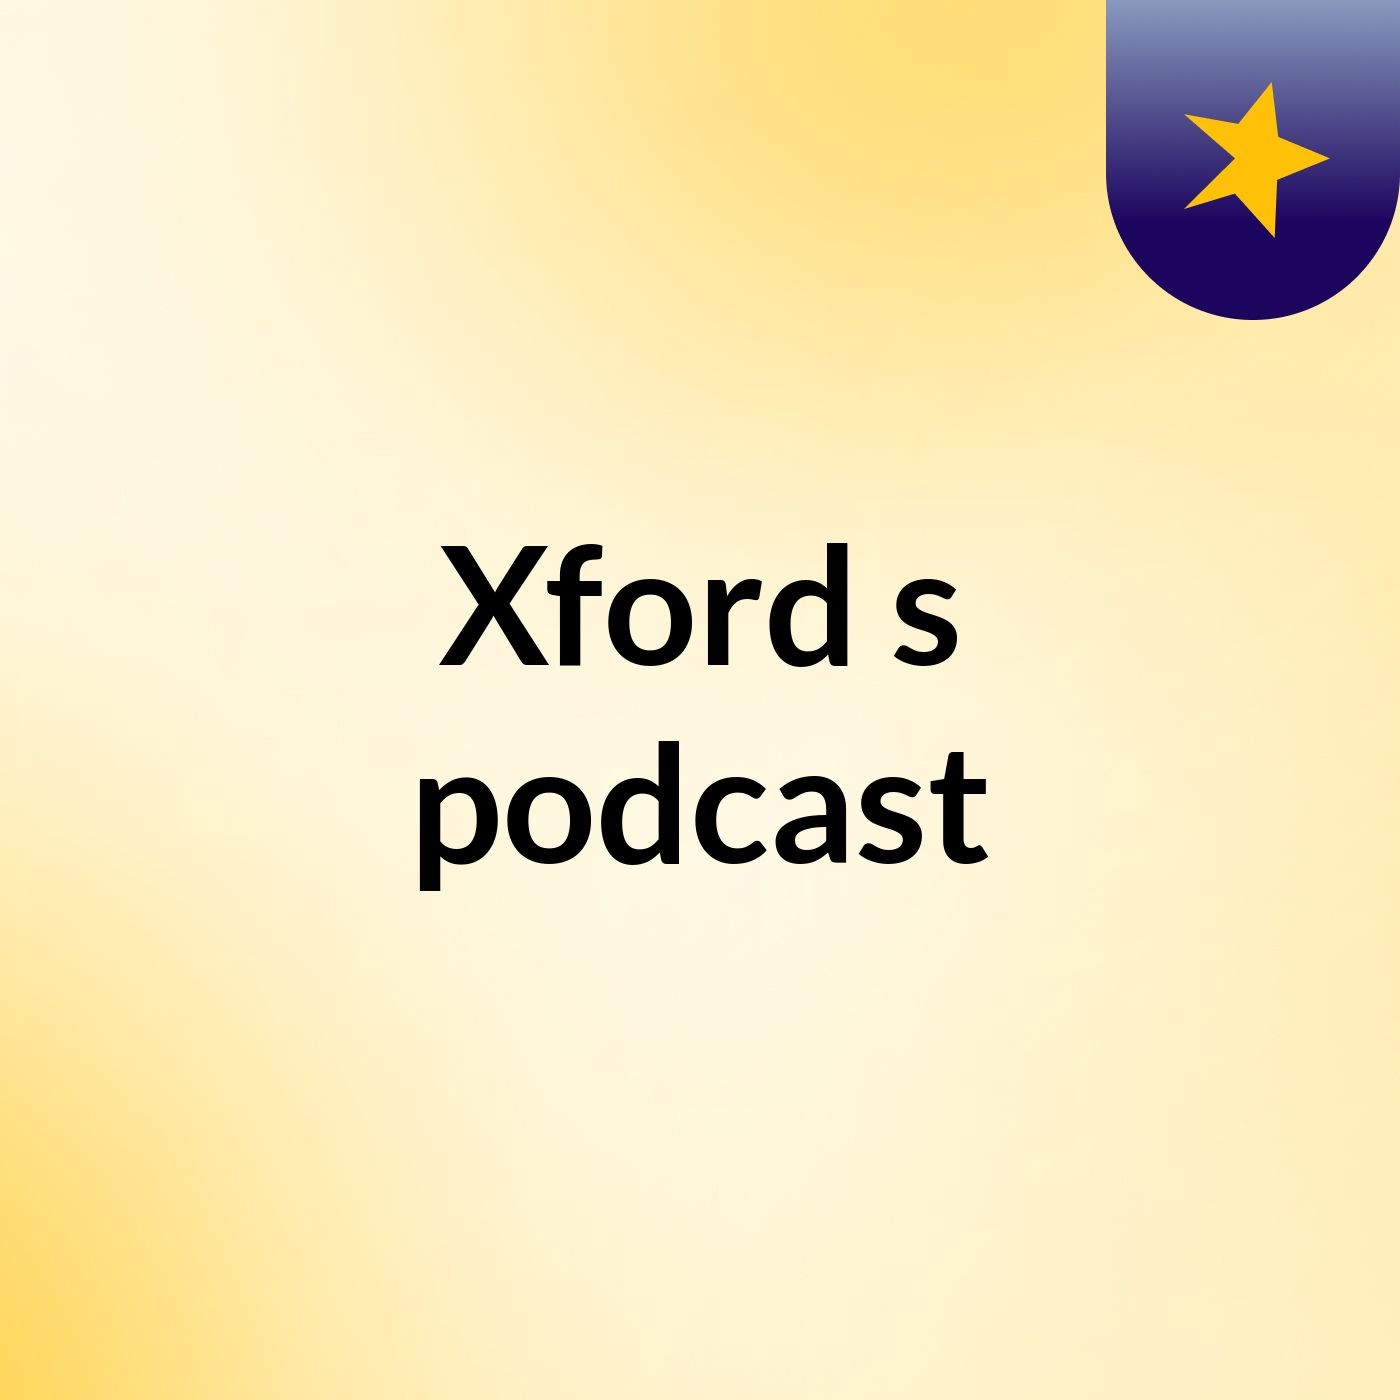 Xford's podcast